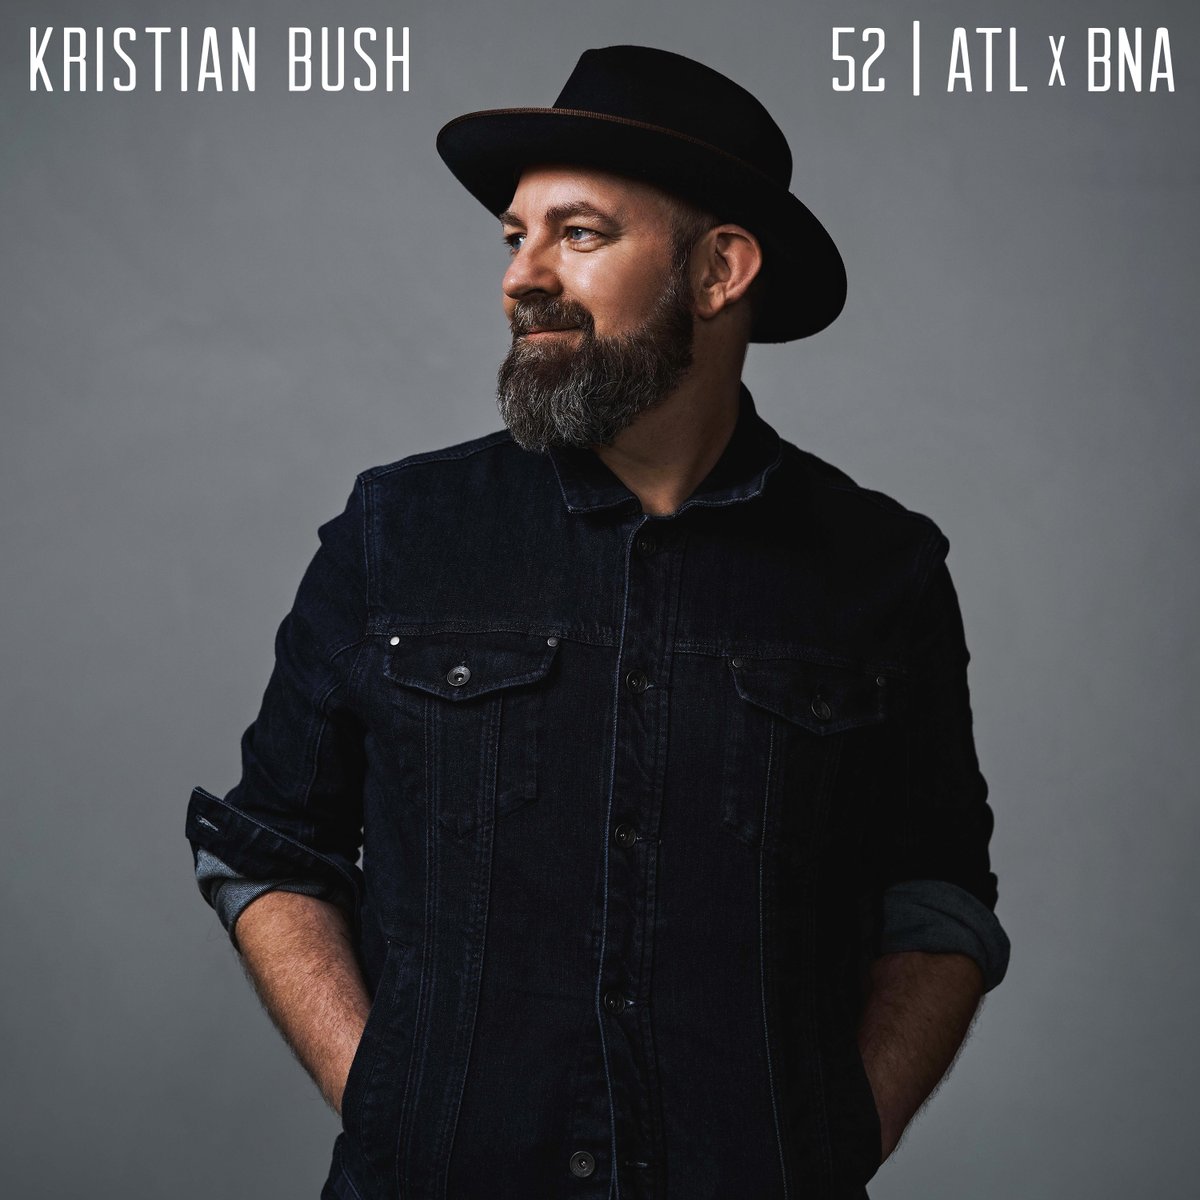 BIG NEWS! In honor of his 52nd birthday, @kristianbush is releasing 52 songs this year! Pre-Save/Pre-Add the first album, ATL x BNA now and listen to “Tennessee Plates” and “Everybody Gotta Go Home” now. Pre-save: lnk.to/52atlxbna